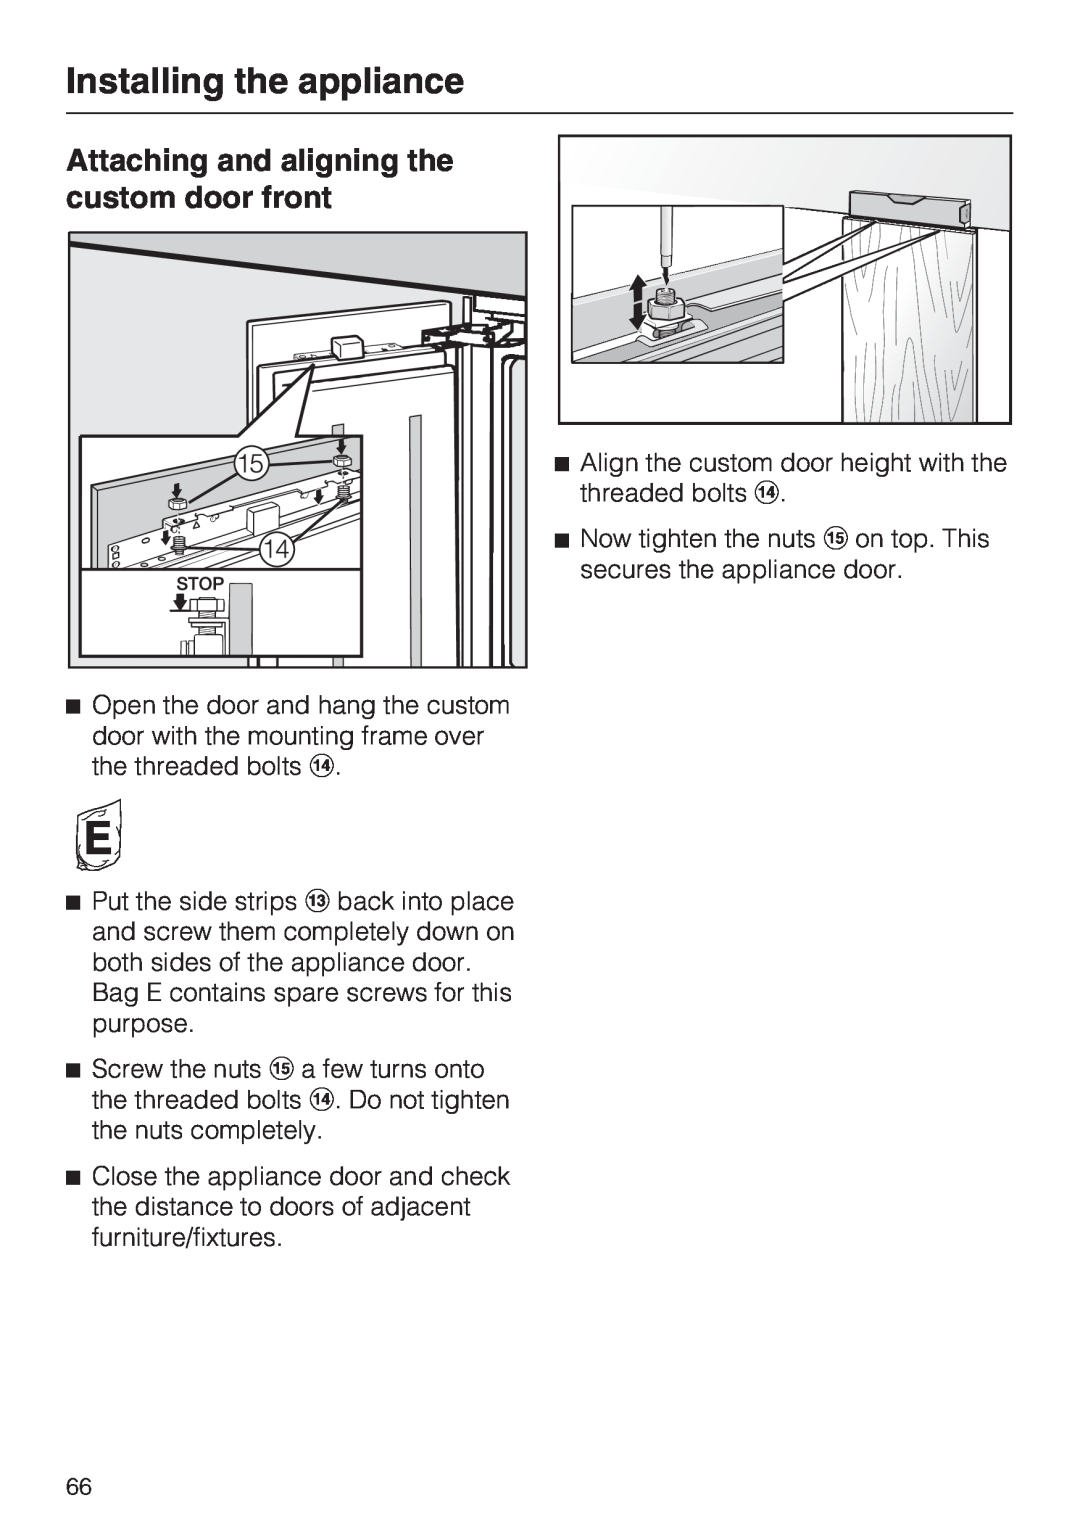 Miele F 1411 Vi installation instructions Attaching and aligning the custom door front, Installing the appliance 